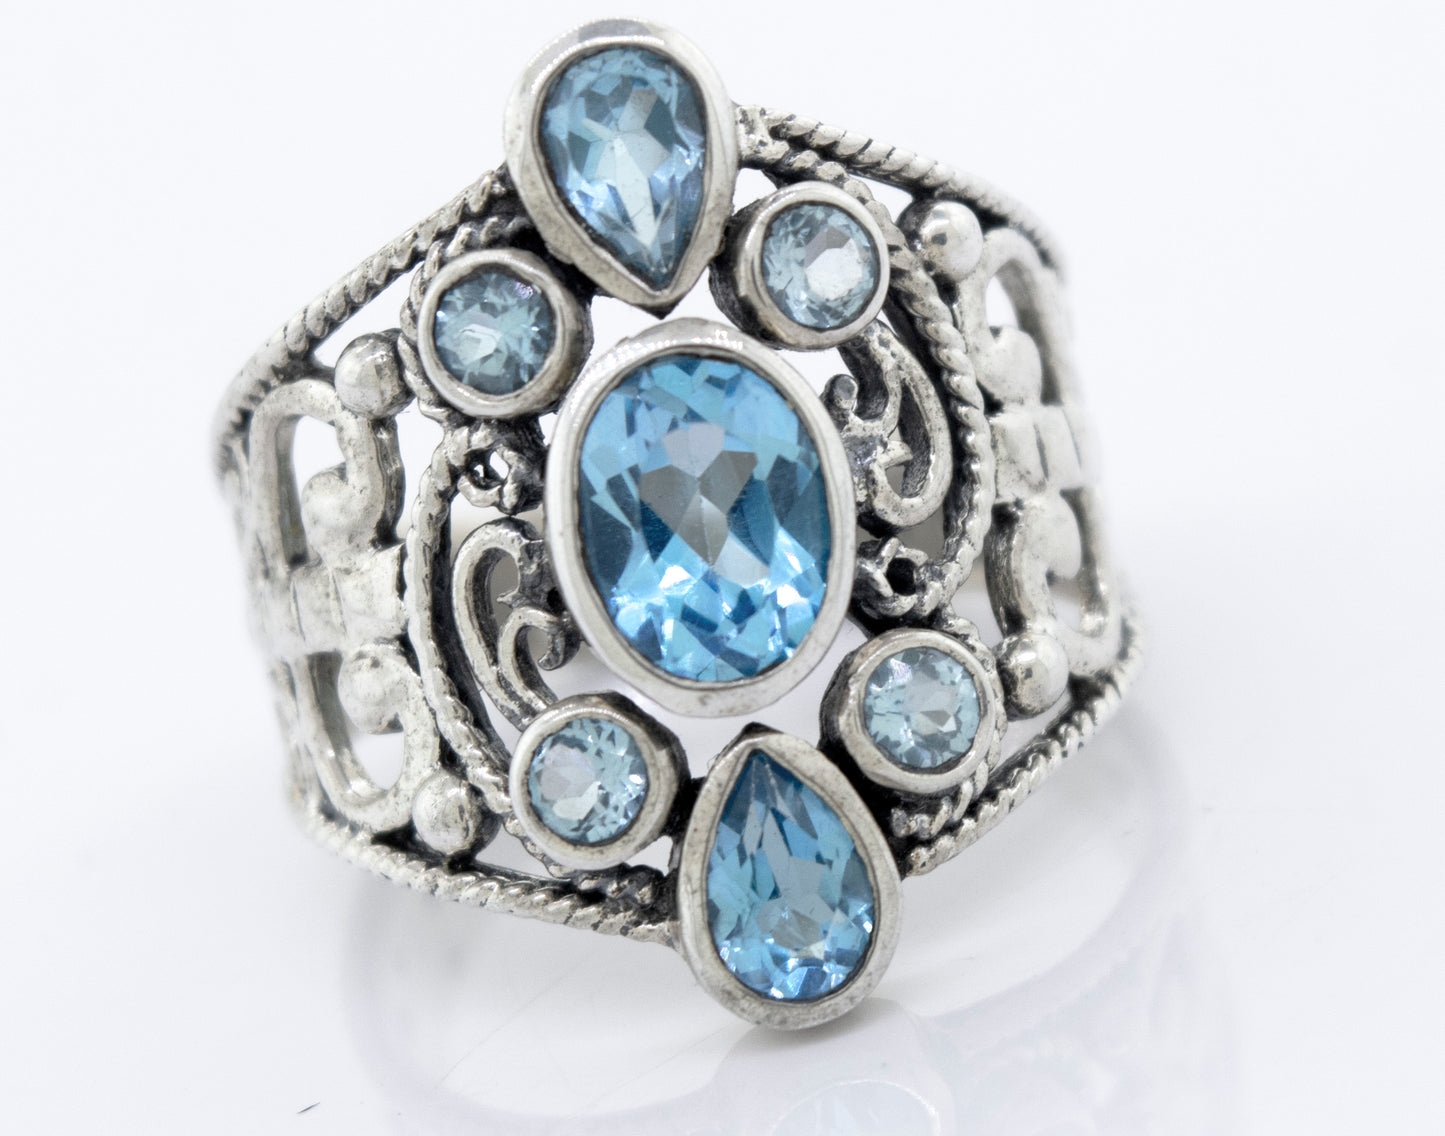 A Blue Topaz Ring With Freestyle Design adorned with mesmerizing blue topaz stones from Super Silver.